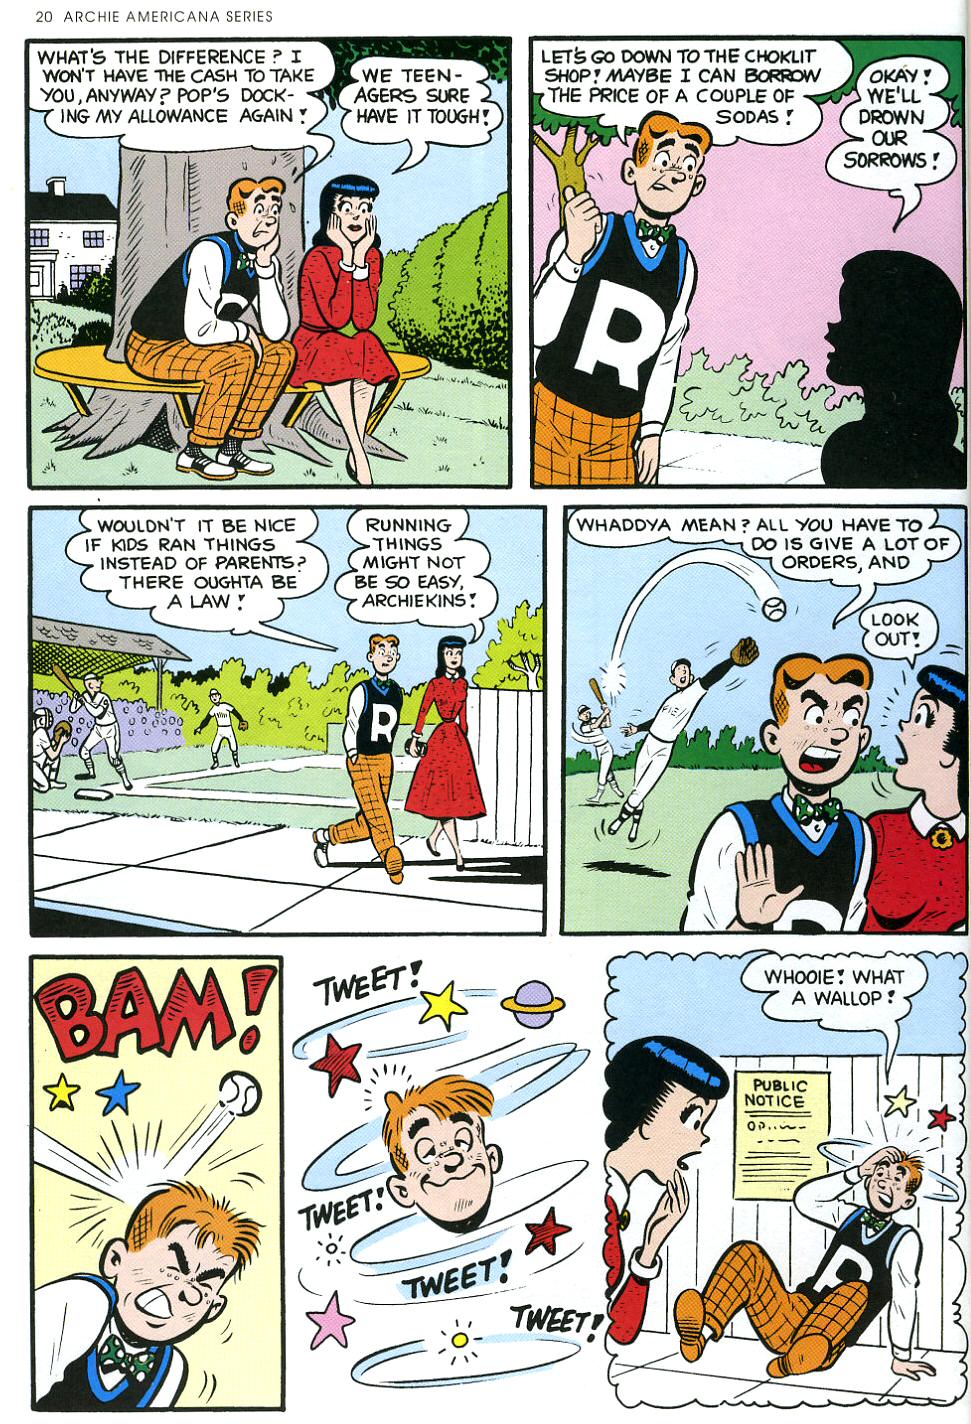 Read online Archie Americana Series comic -  Issue # TPB 2 - 22